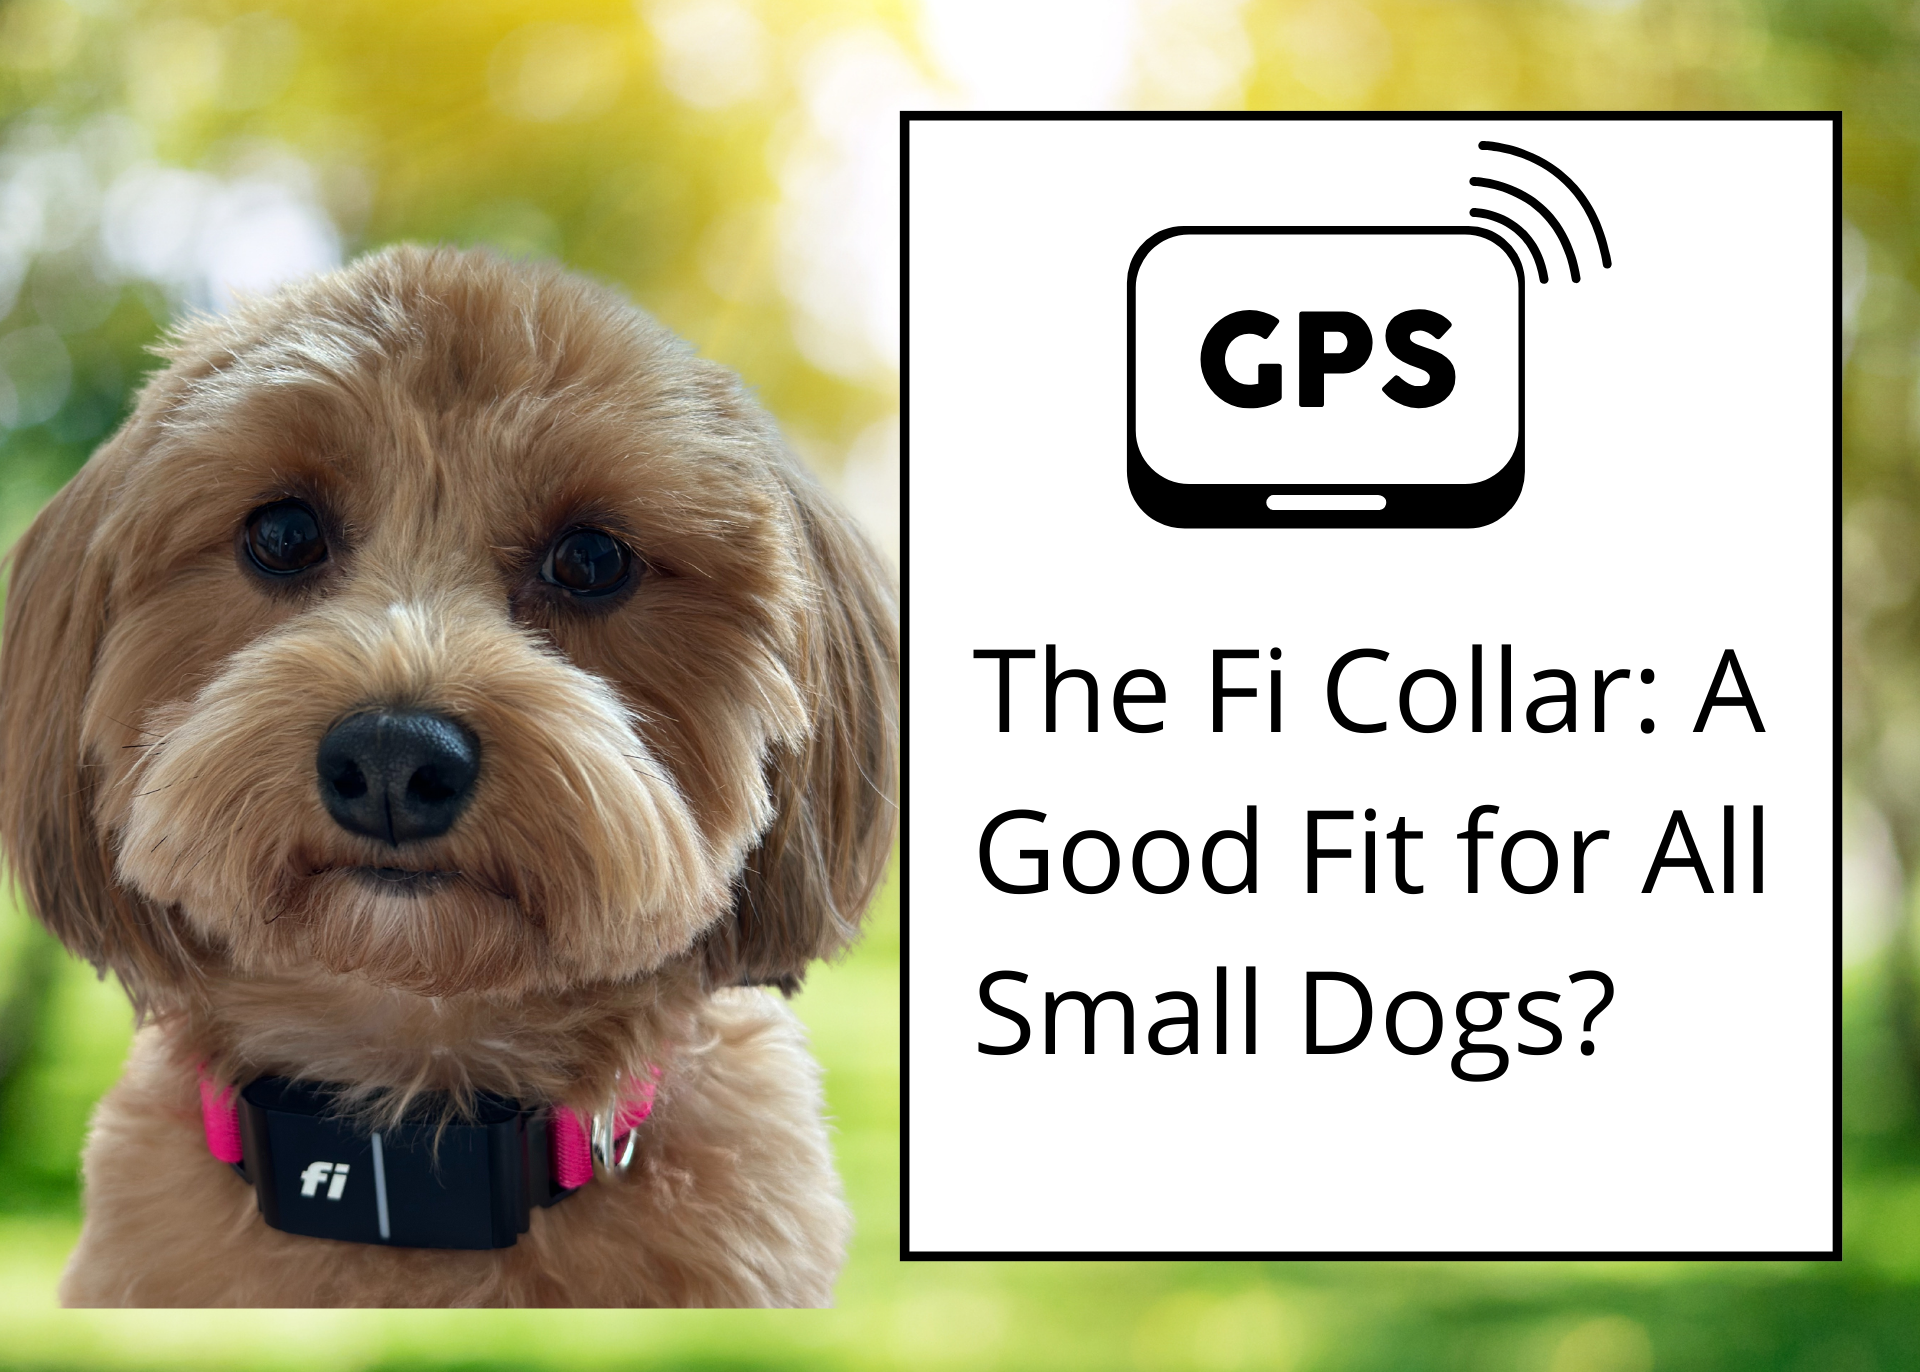 Red Havanese wearing Fi collar next to text asking whether the collar is a good fit for small dogs